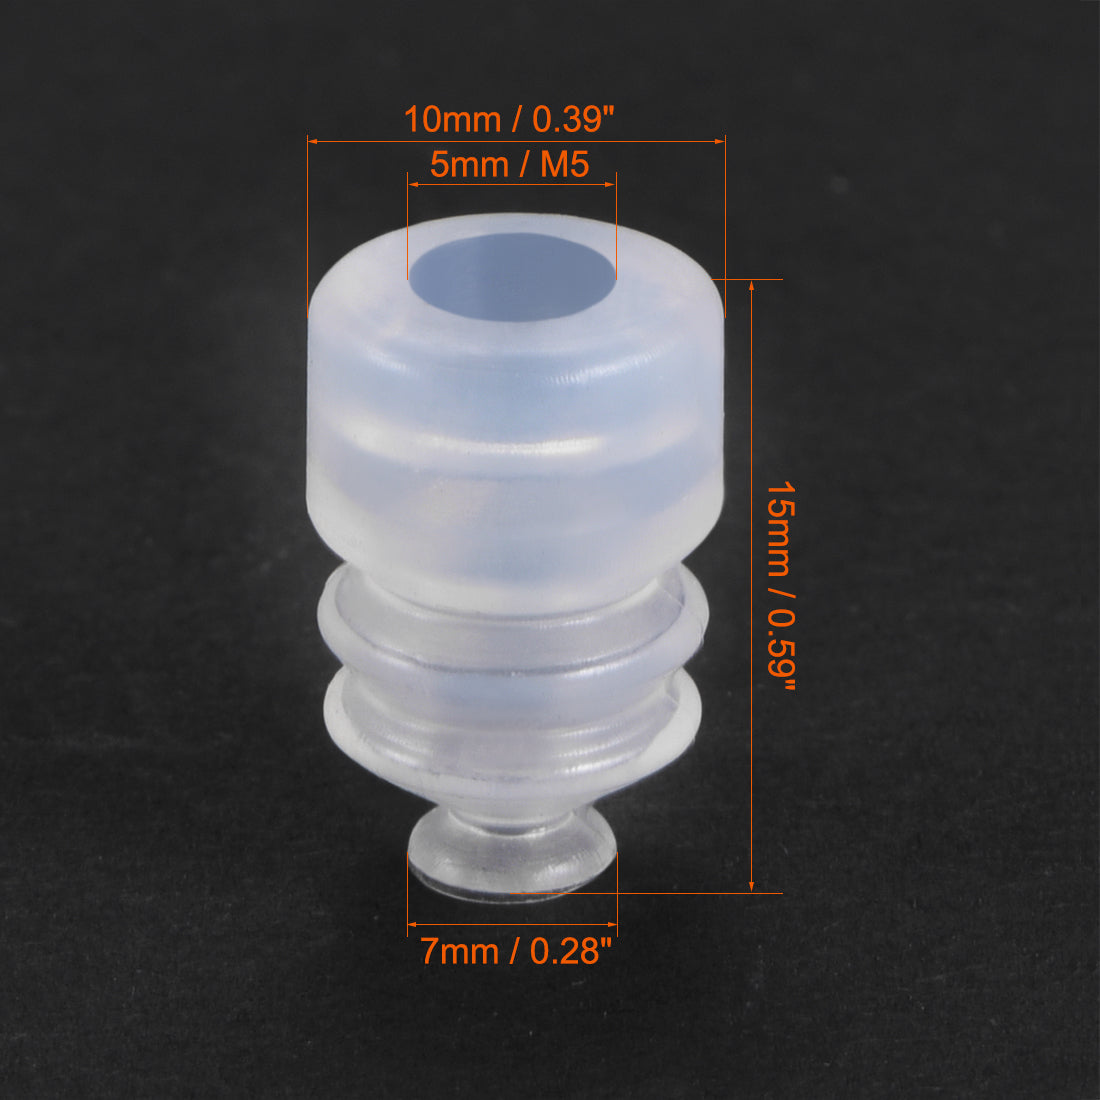 uxcell Uxcell Clear White Soft Silicone Waterproof Vacuum Suction Cup 7mmx5mm Bellows Suction Cup,4pcs